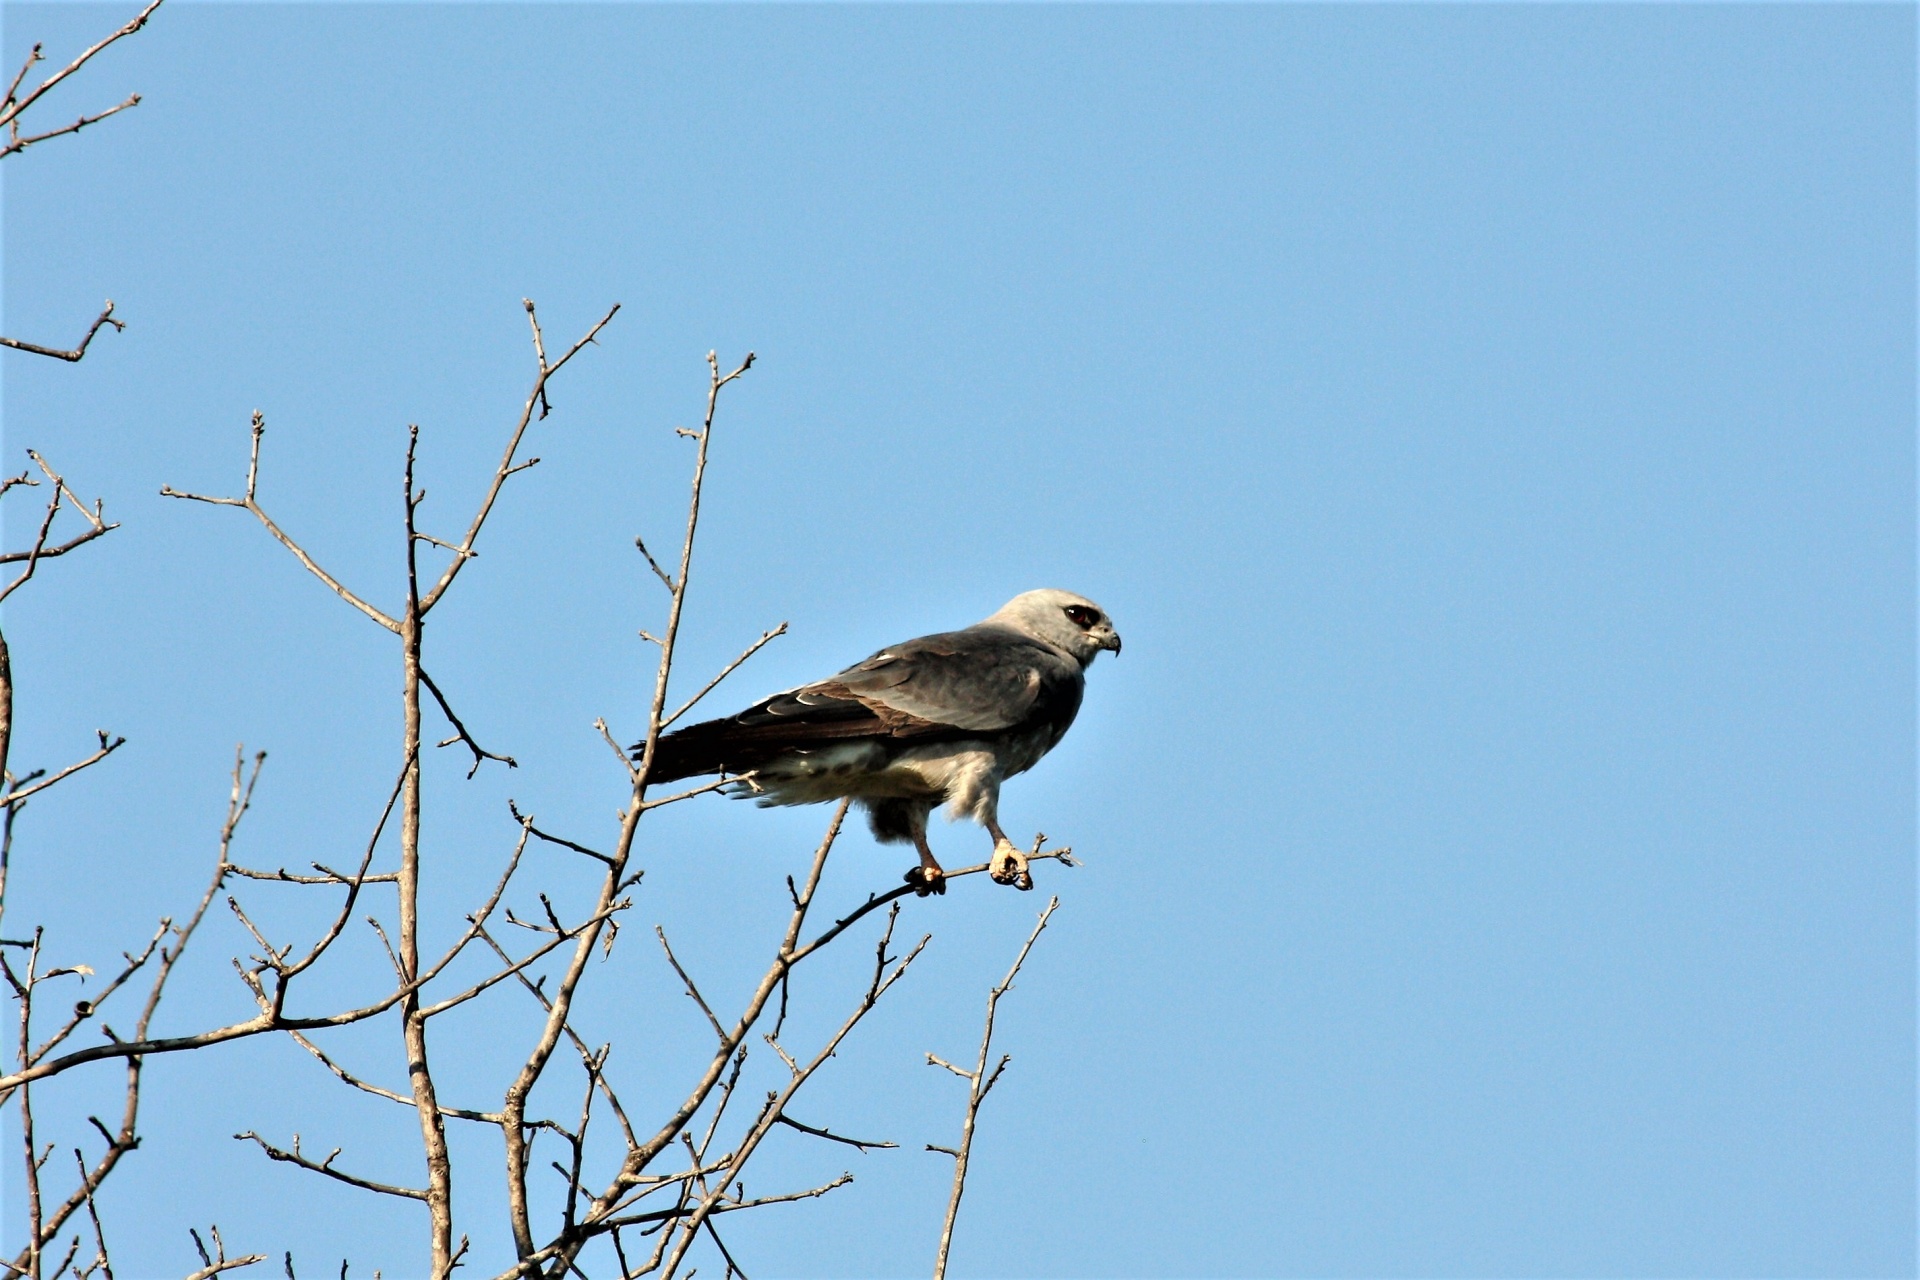 A Mississippi kite bird is perched on a tiny tree branch in the top of a tree with a blue sky background.